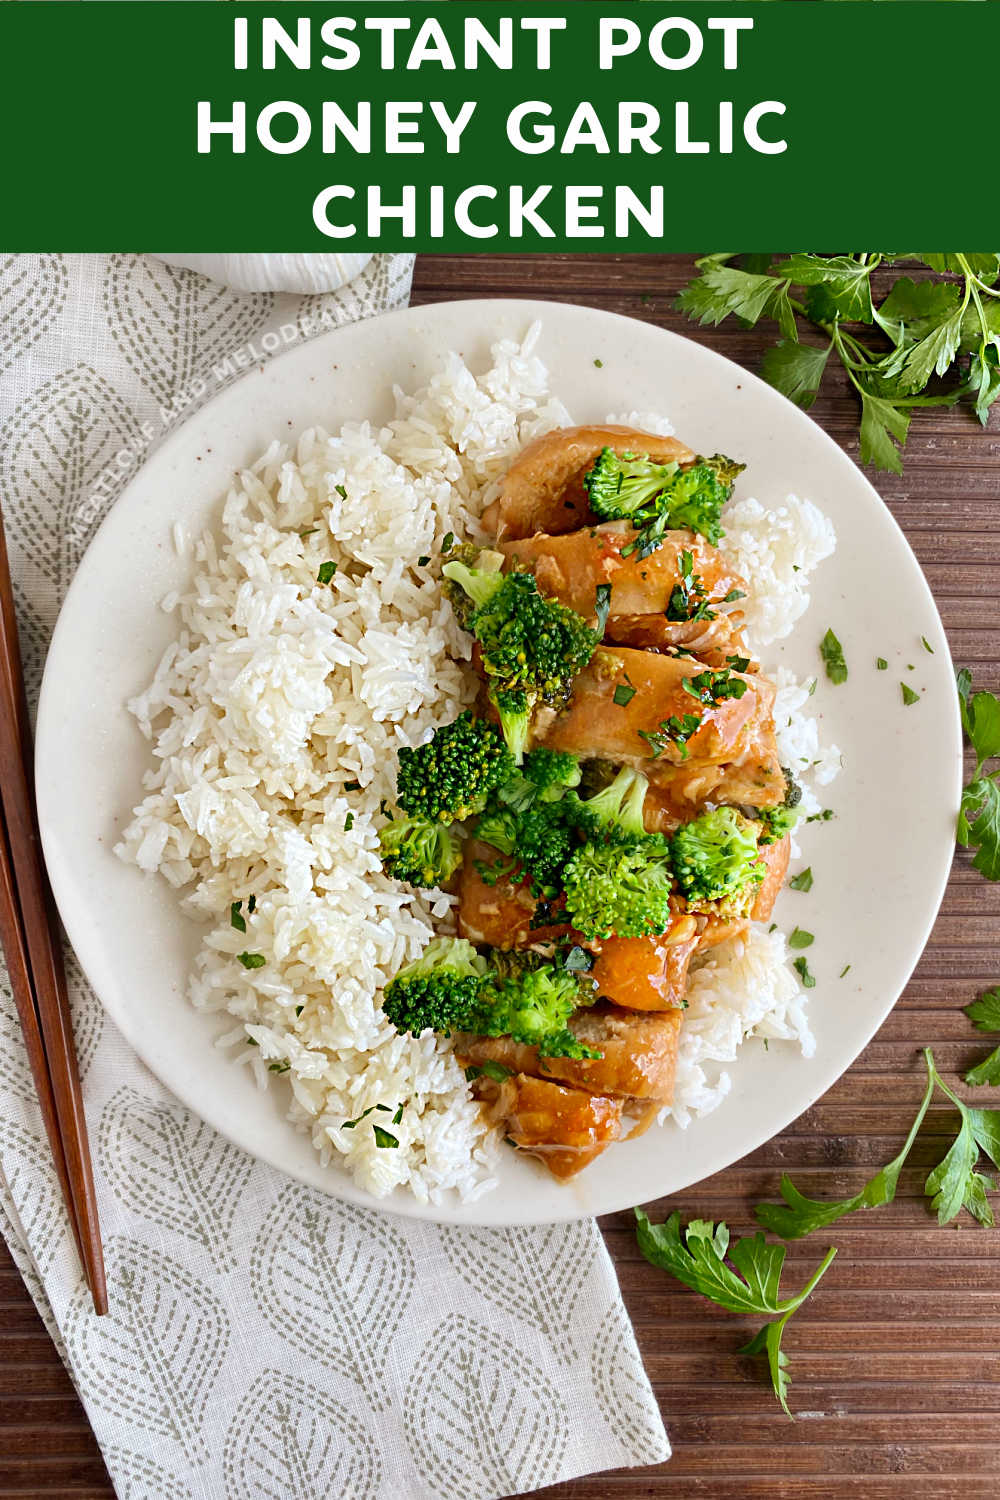 Instant Pot Honey Garlic Chicken (and Broccoli) is an easy recipe with skinless chicken breasts in a delicious homemade savory sauce. Add broccoli and serve with rice for a complete meal your whole family will love! via @meamel